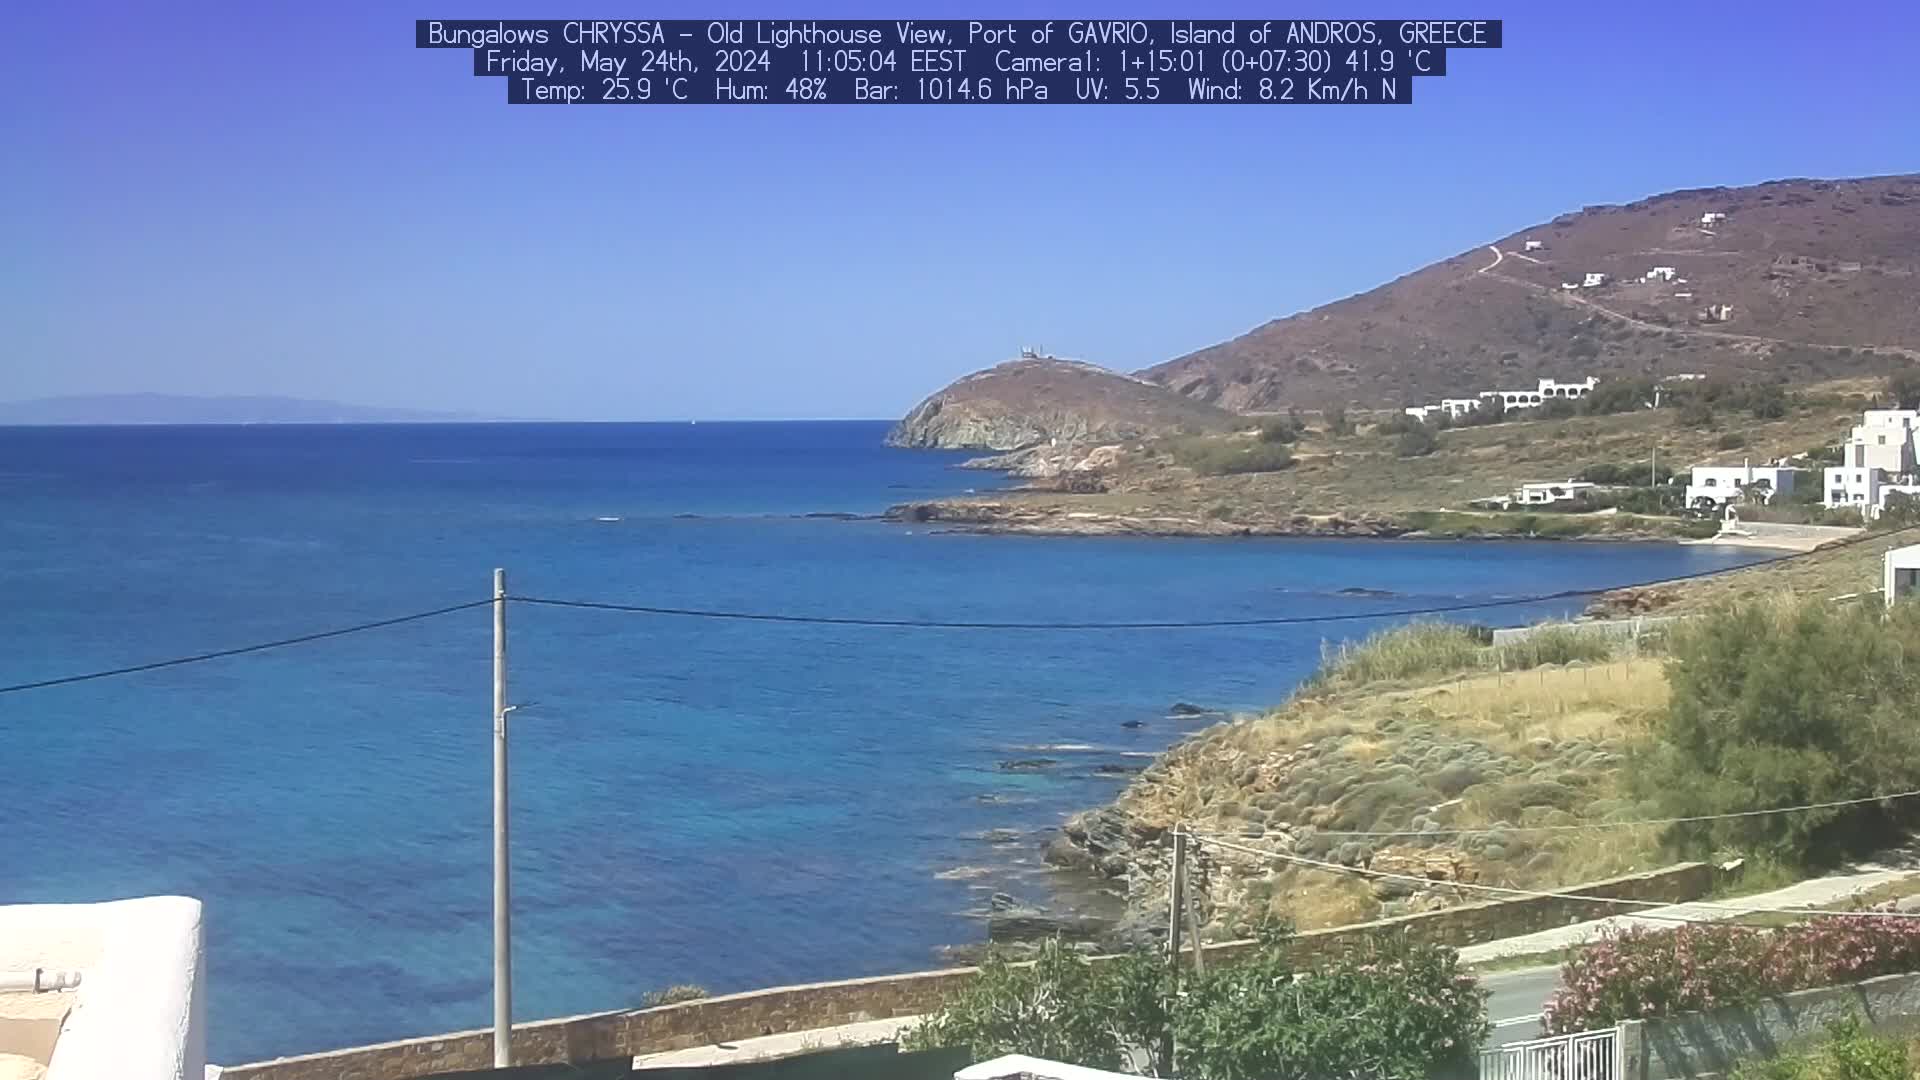 Gavrio (Andros) Wed. 11:05